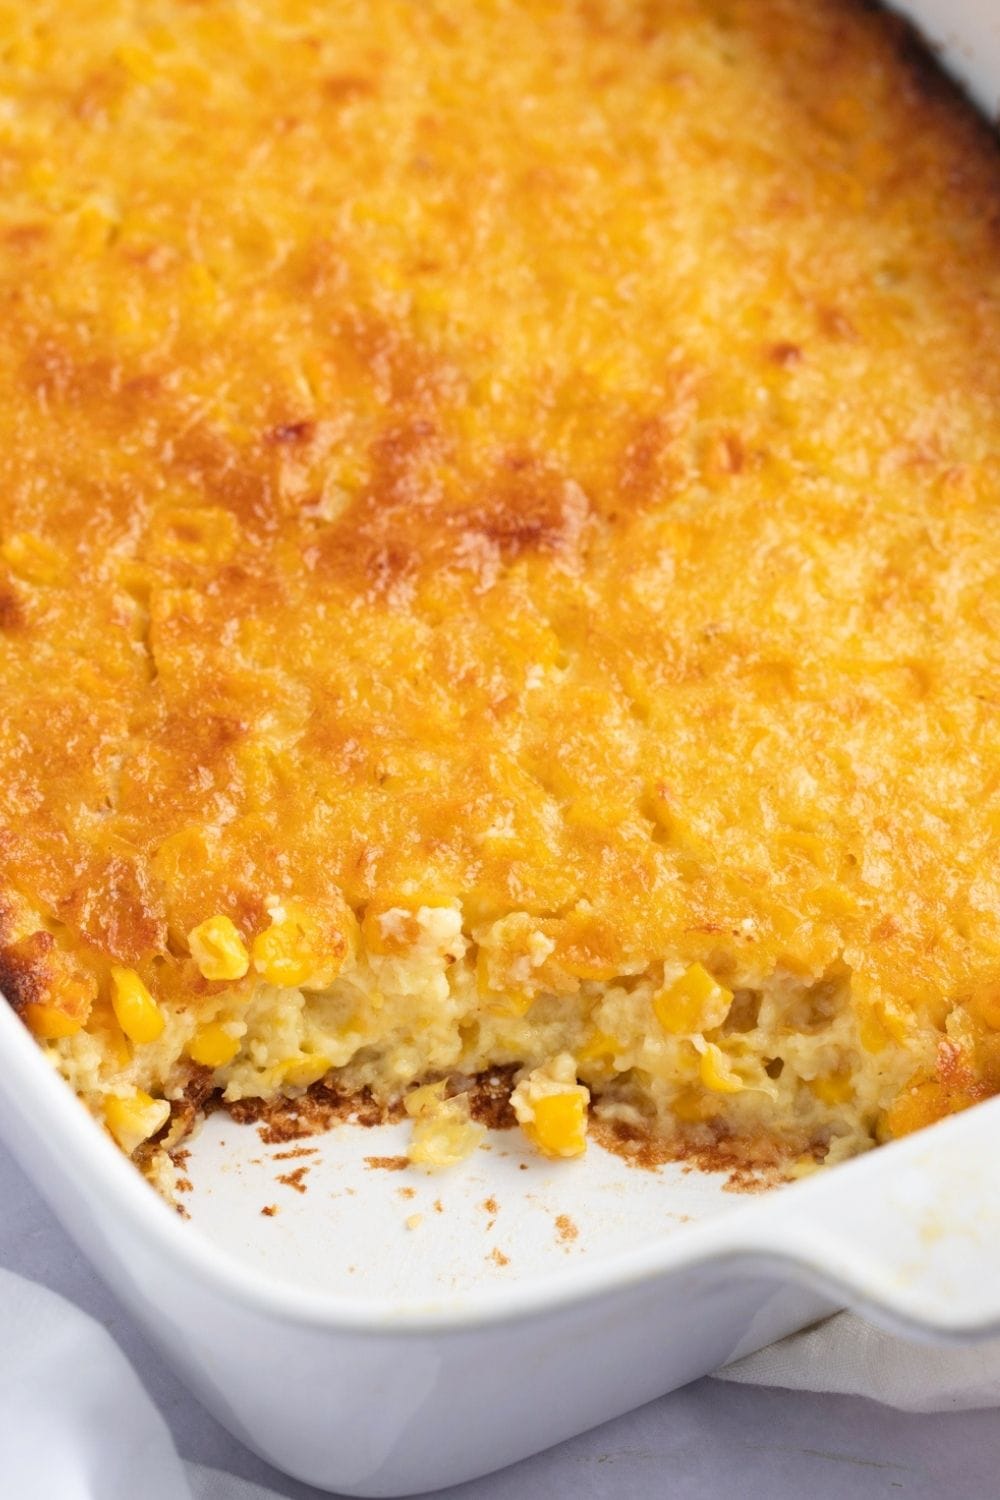 Portion missing corn pudding on a casserole dish.